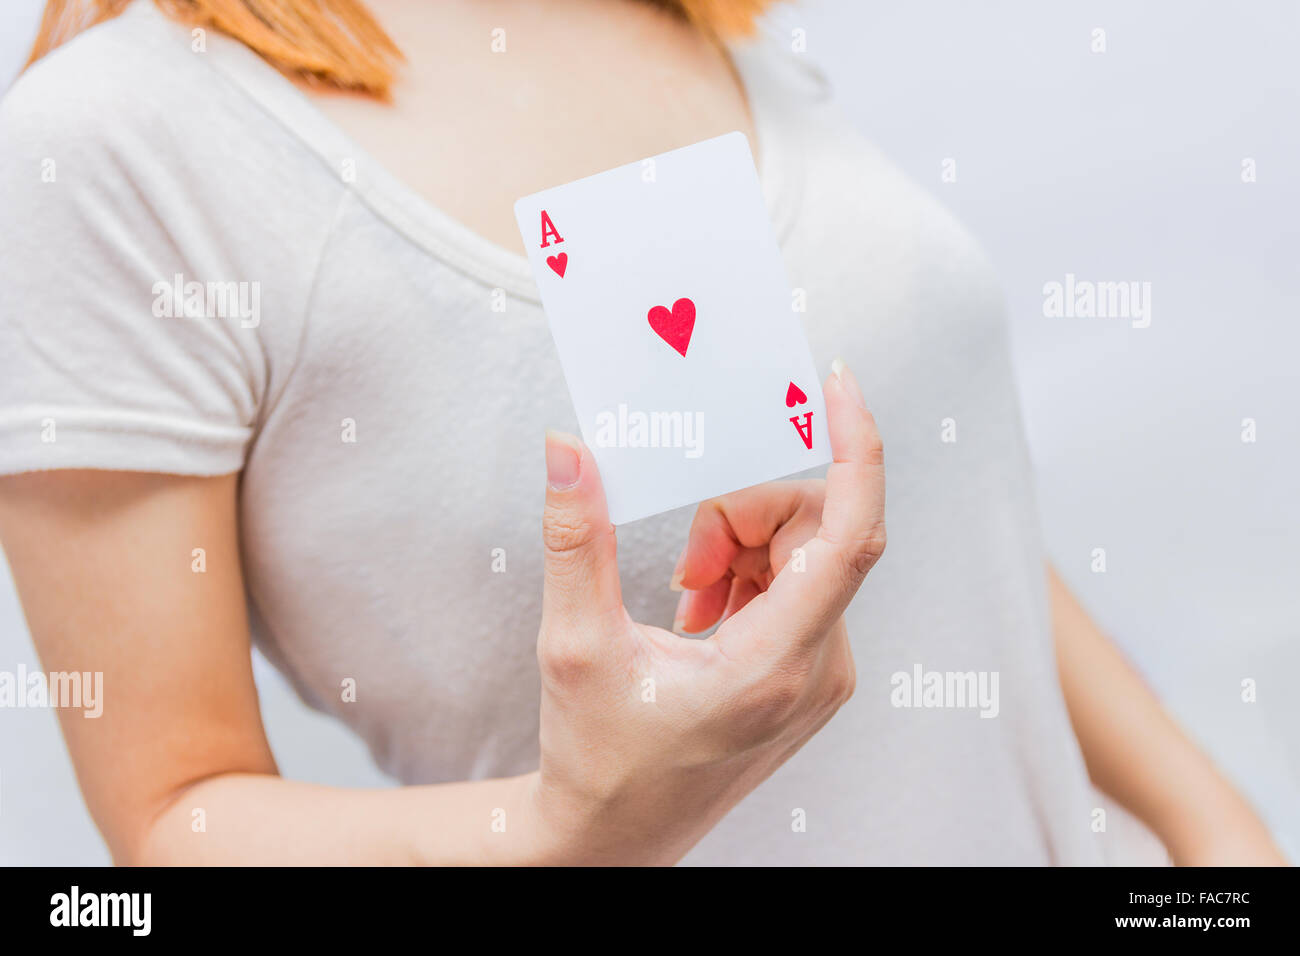 young woman holding in hand poker card with combination of Full House. in focus hand and poker card. Stock Photo